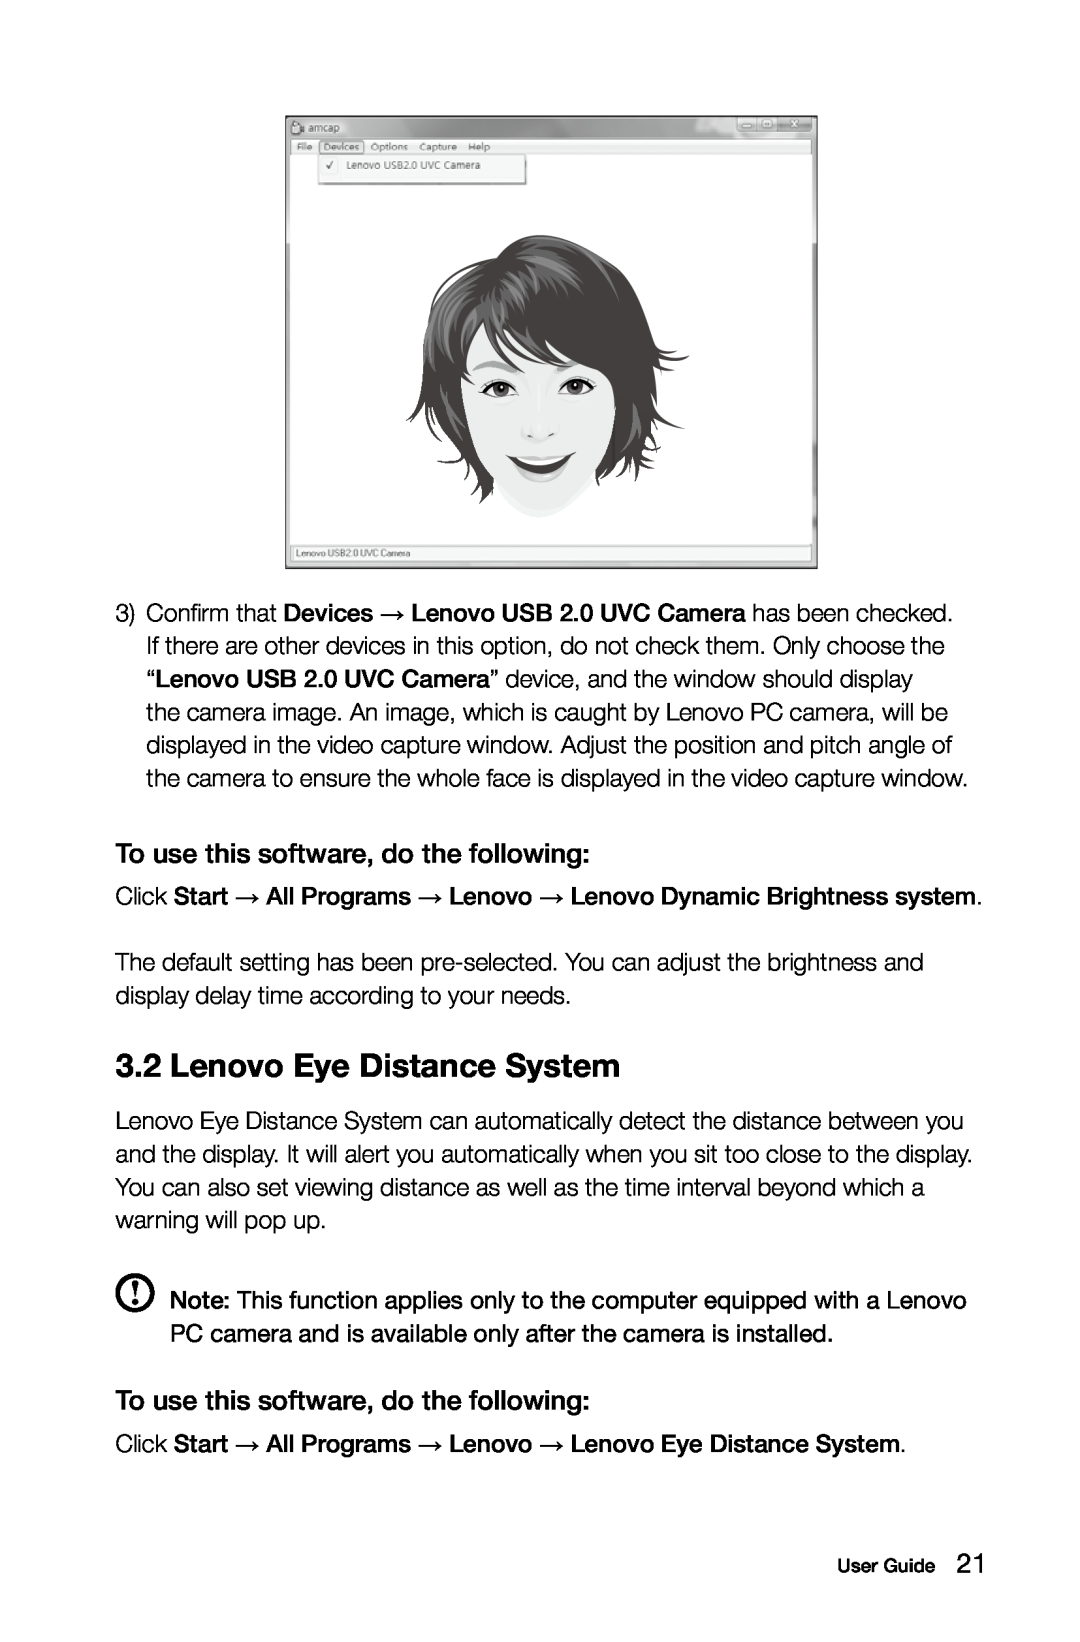 Lenovo 10091/2558/1196, 10080/3099/1194 manual Lenovo Eye Distance System, To use this software, do the following 